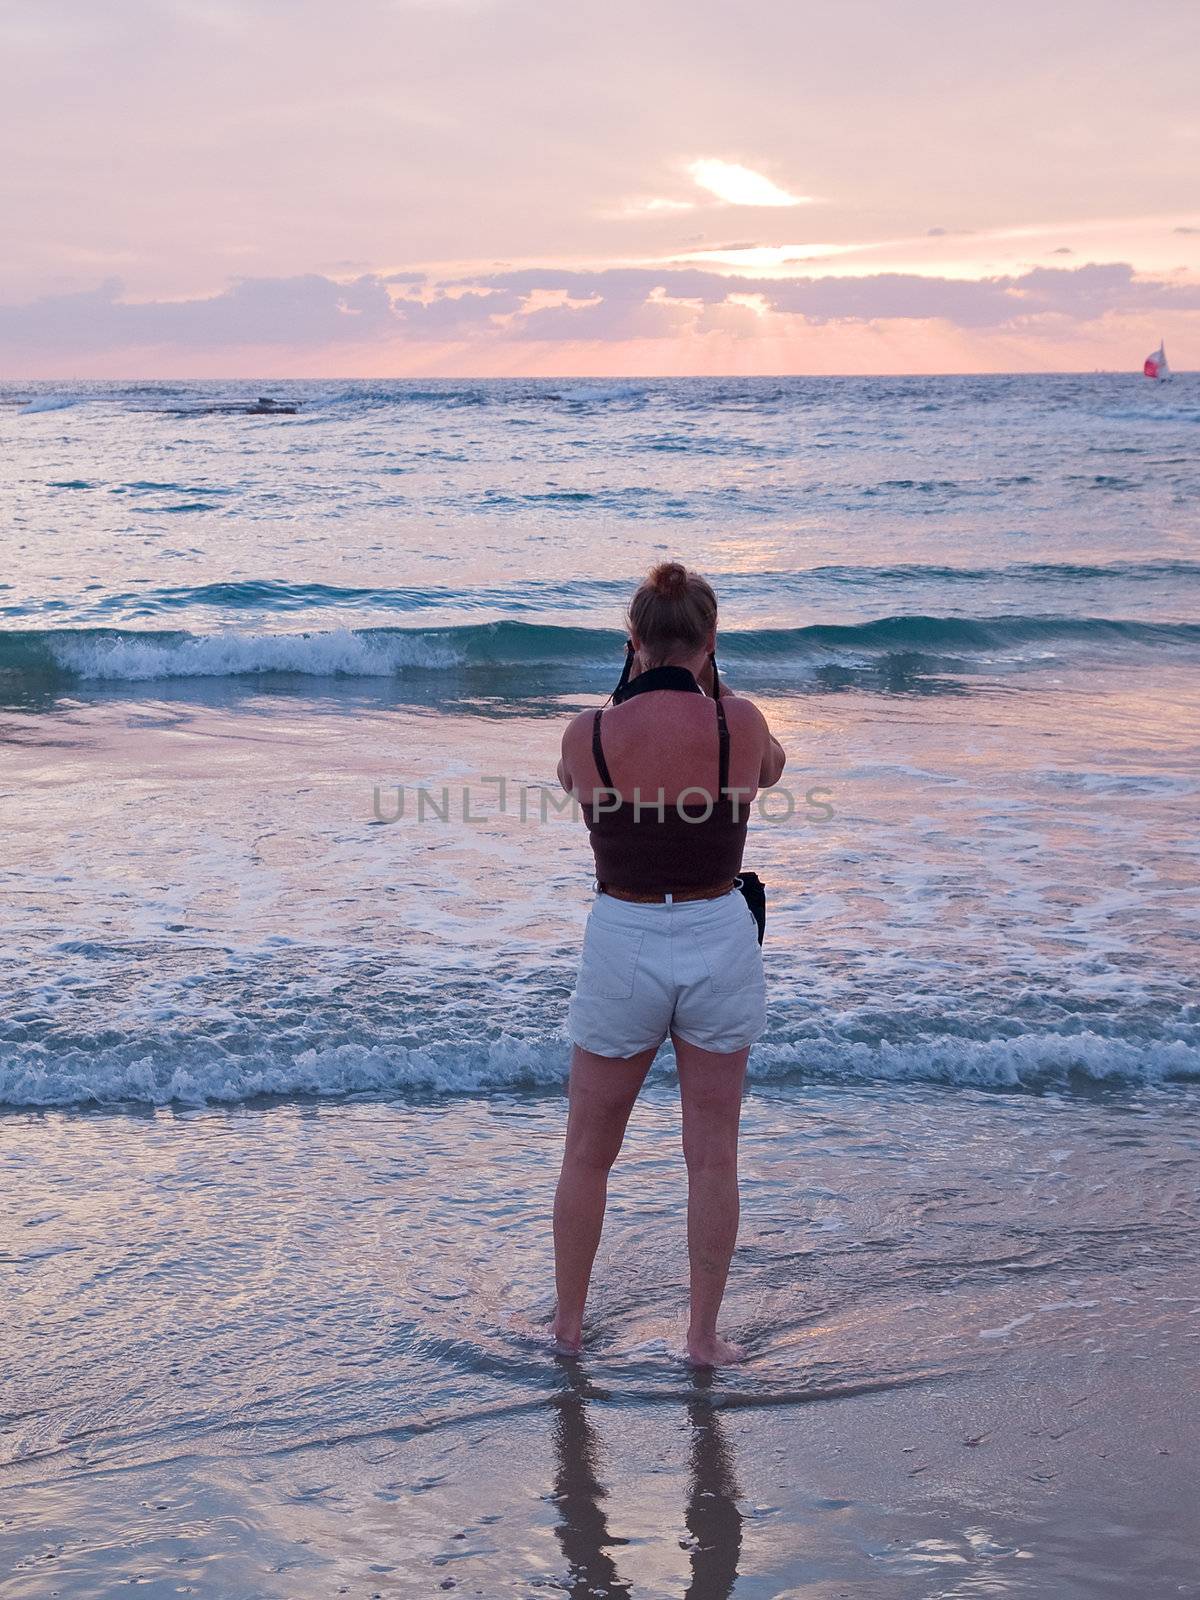 Attractive woman on a beach taking pictures with camera by Ronyzmbow